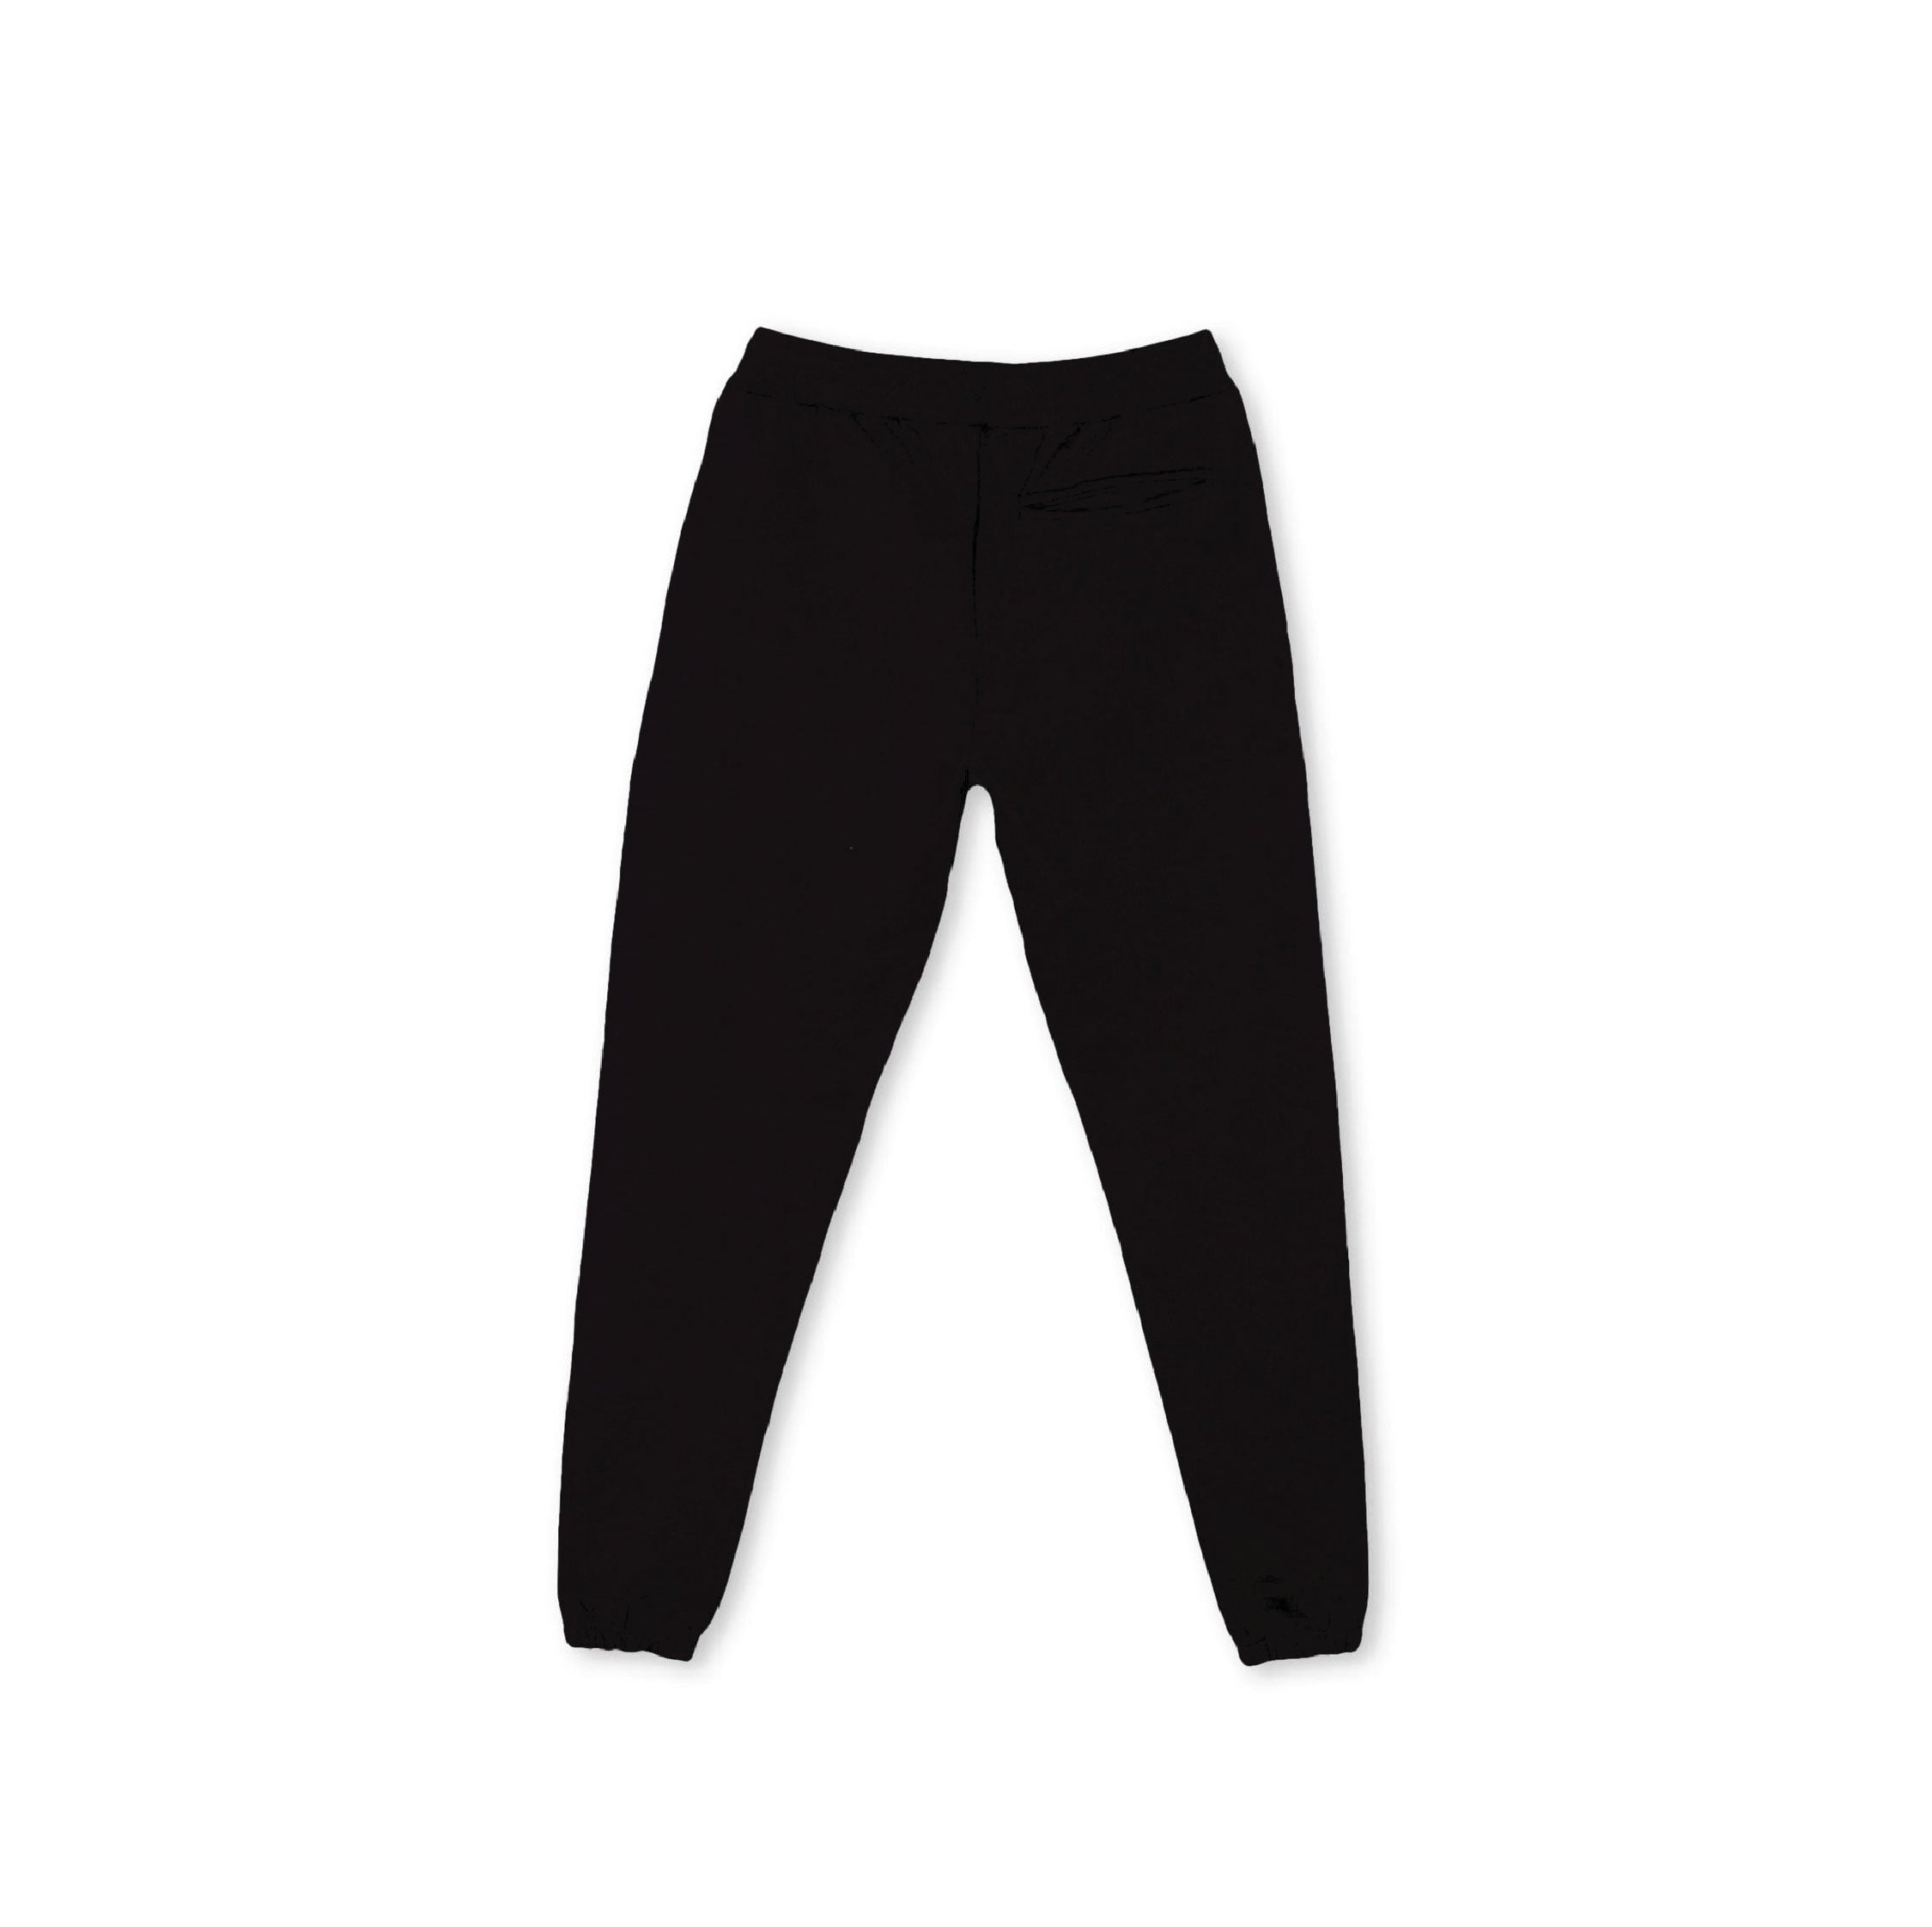 ESTATE OF MIND FRENCH TERRY SWEATPANTS - BLACK